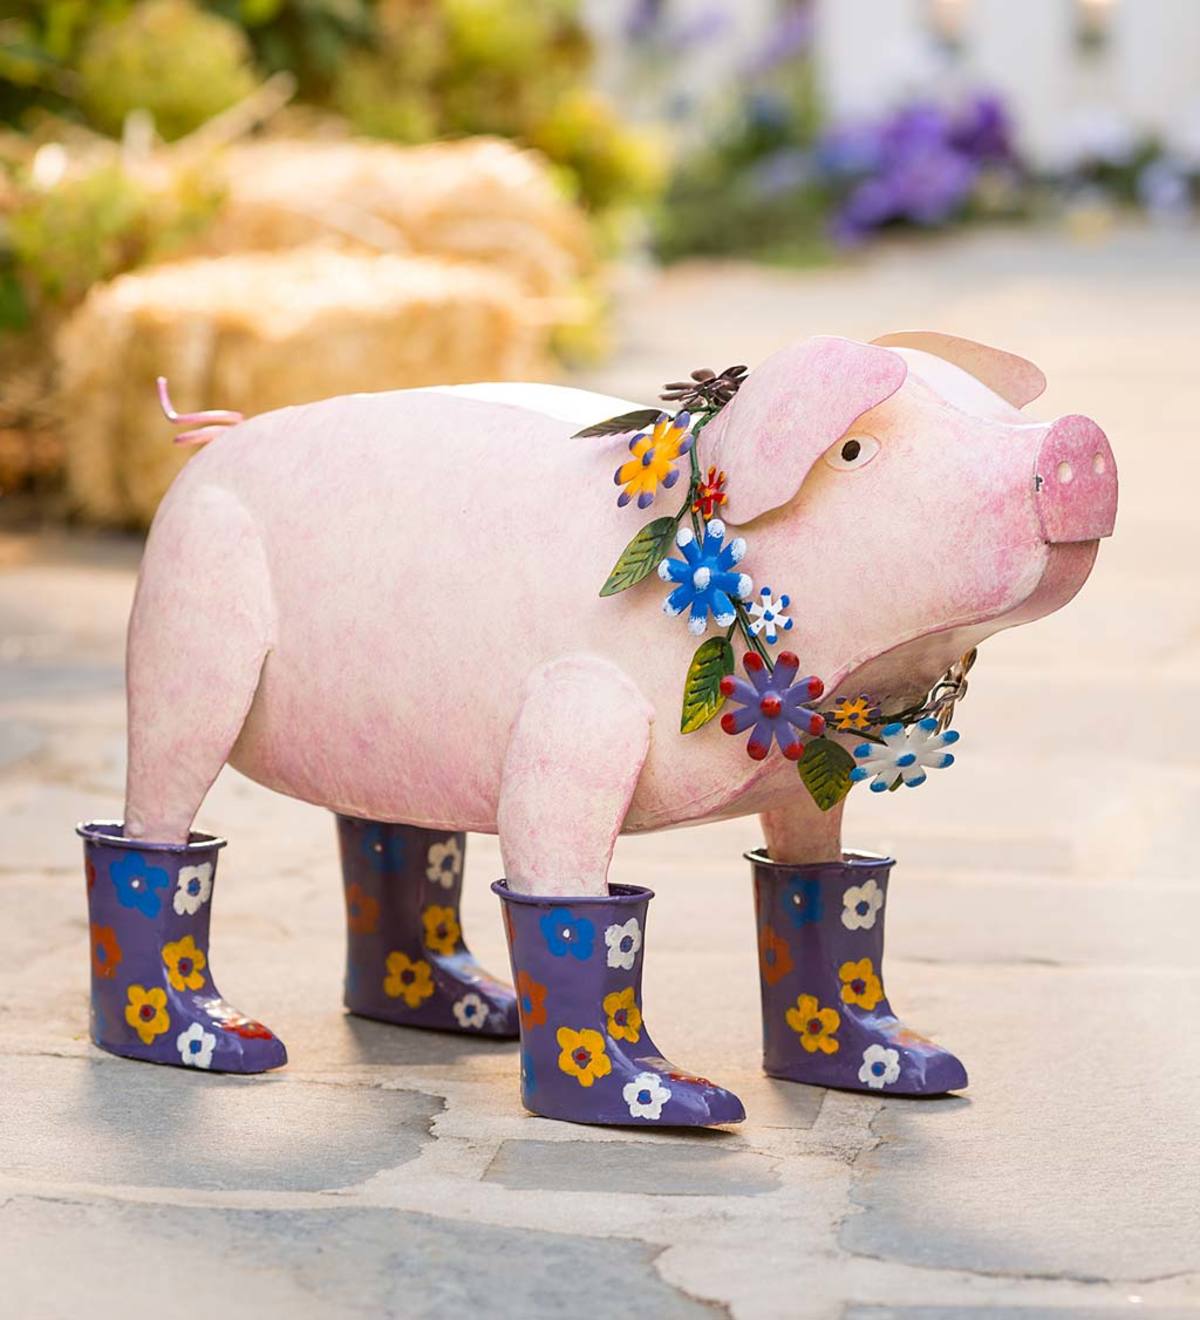 Handcrafted Metal Pig with Flowered Purple Rain Boots | Wind and Weather | Weite Hosen